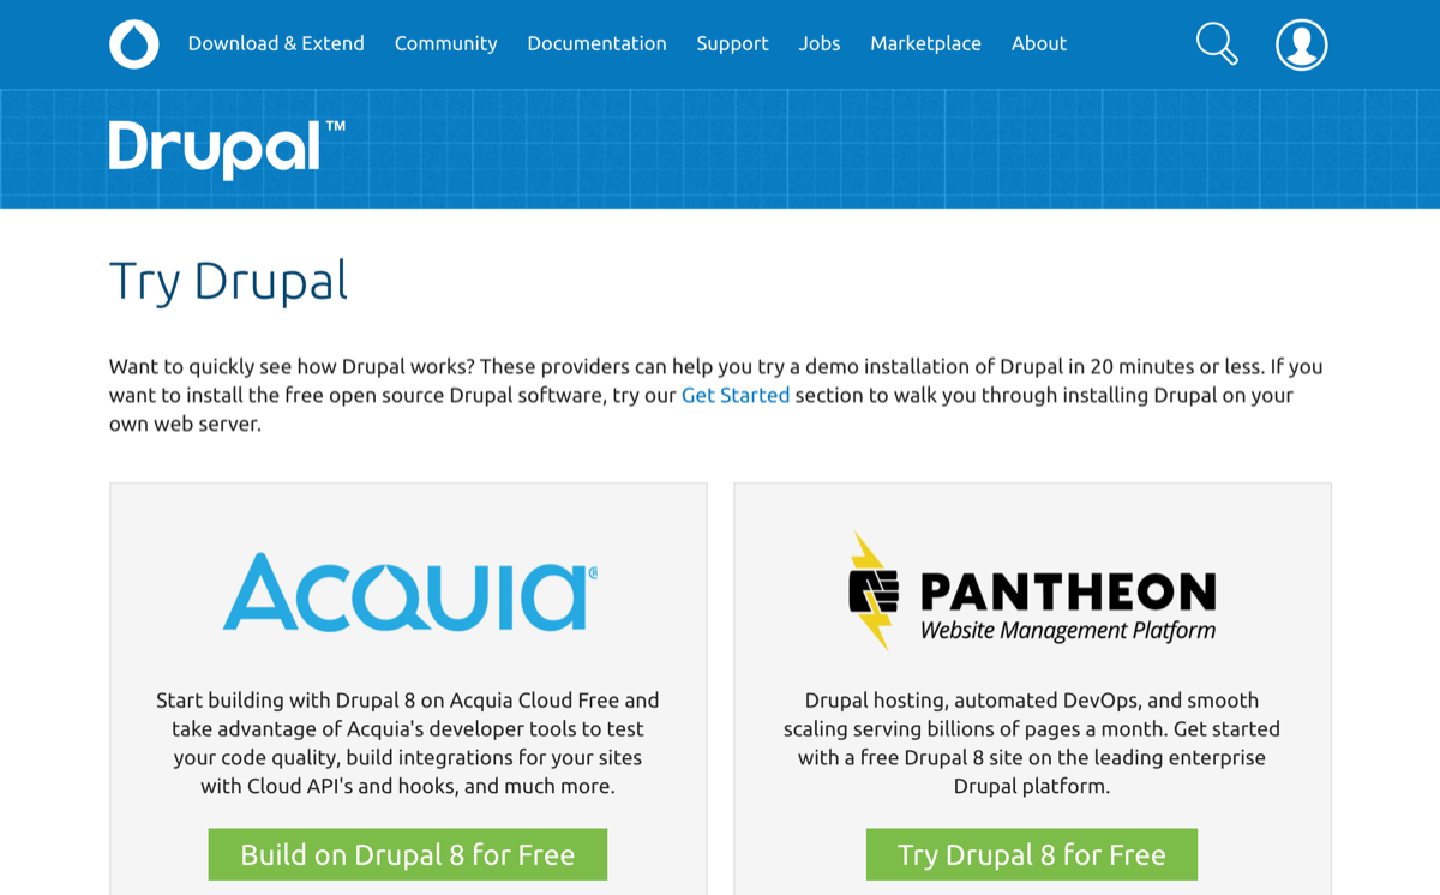 Trying Drupal